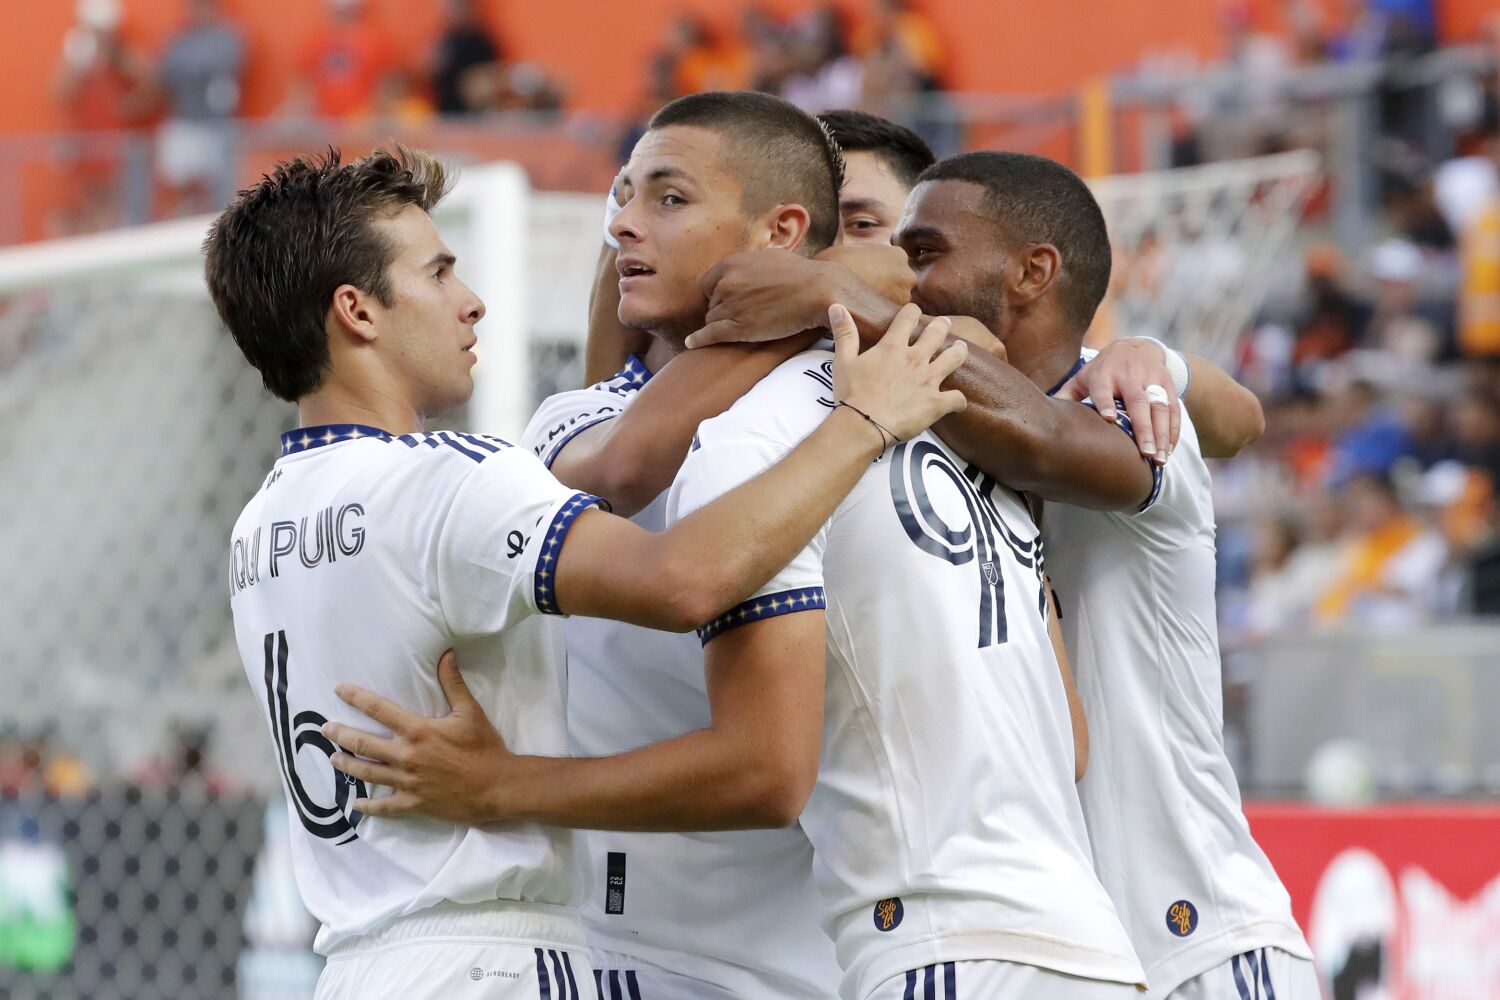 Galaxy clinches home playoff date, takes important step in rebuilding legacy